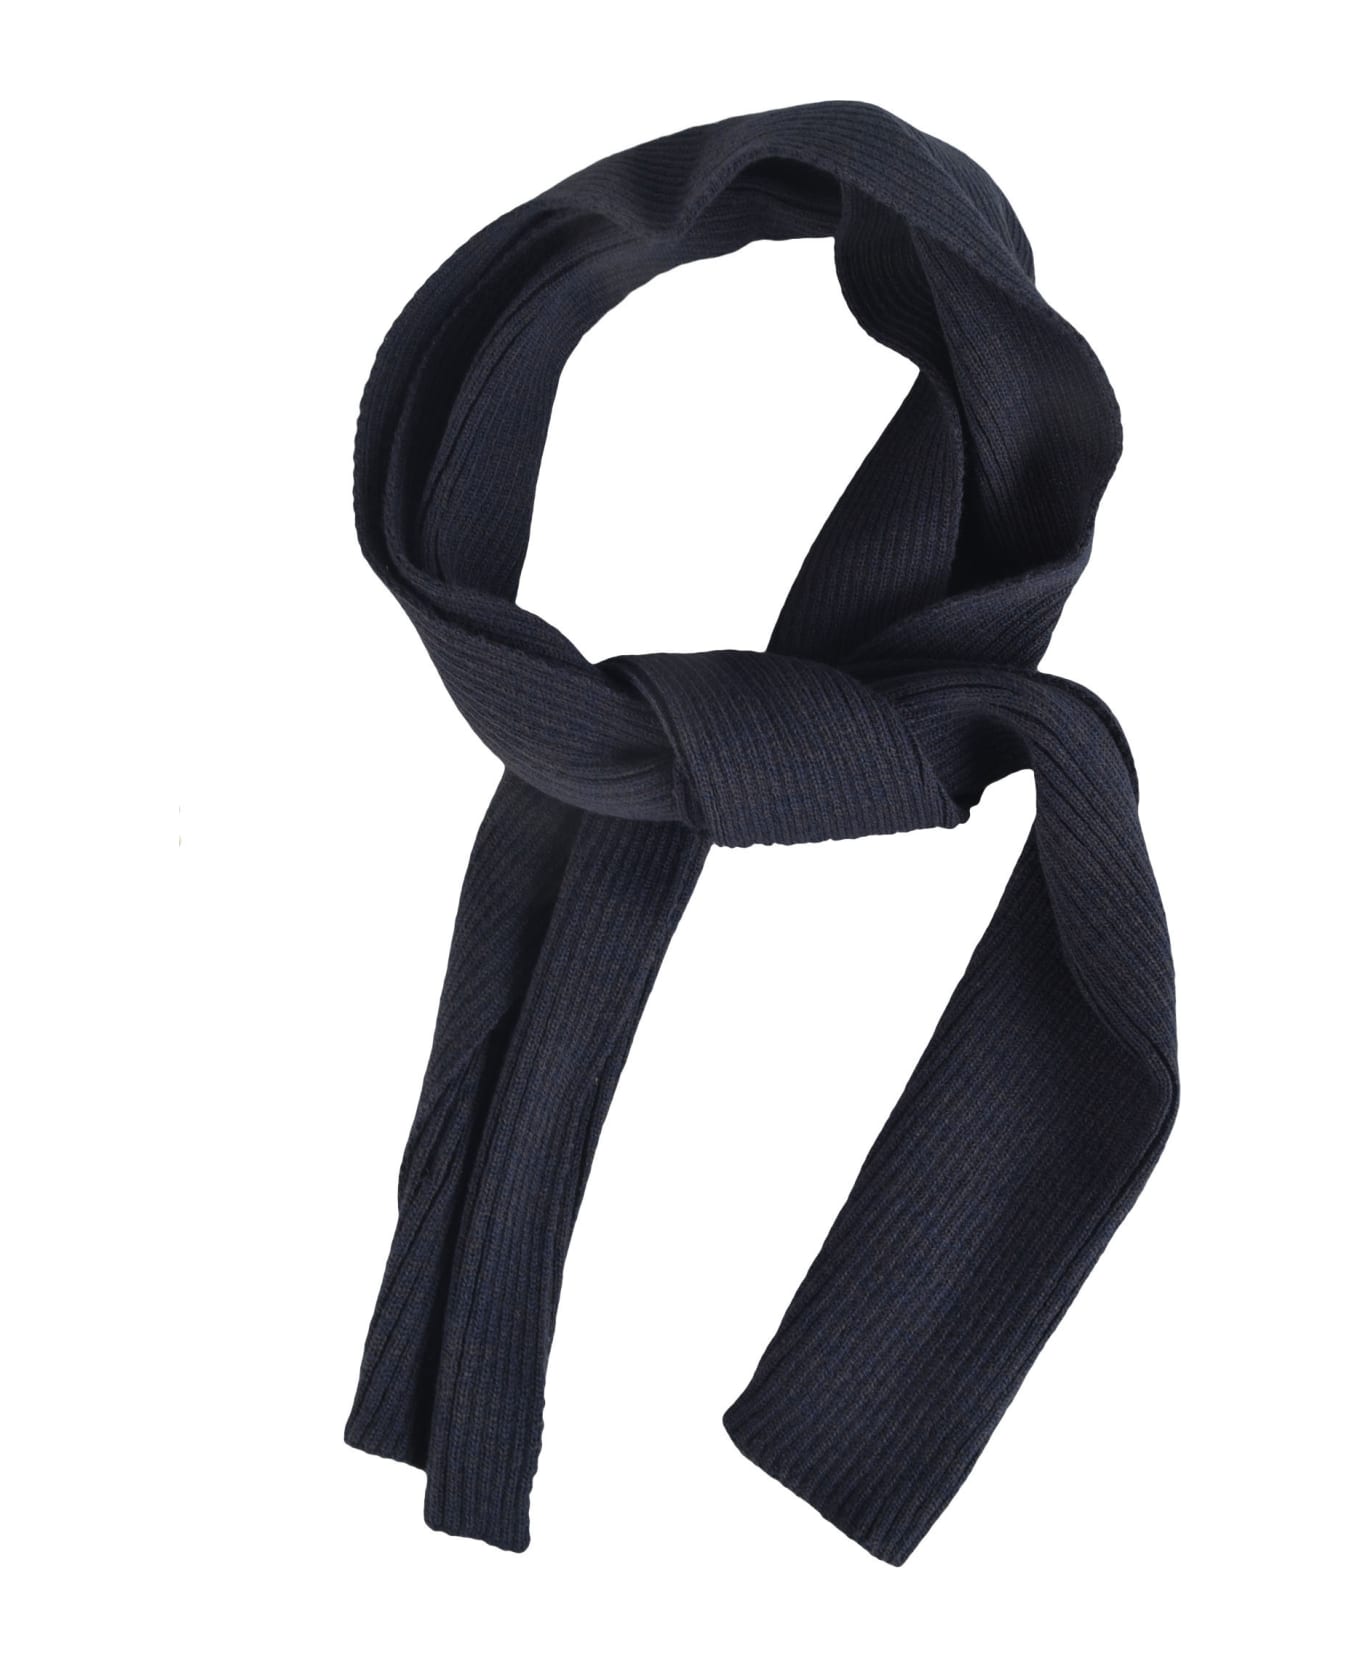 Barbour Crimdon Beanie And Scarf Set - Navy